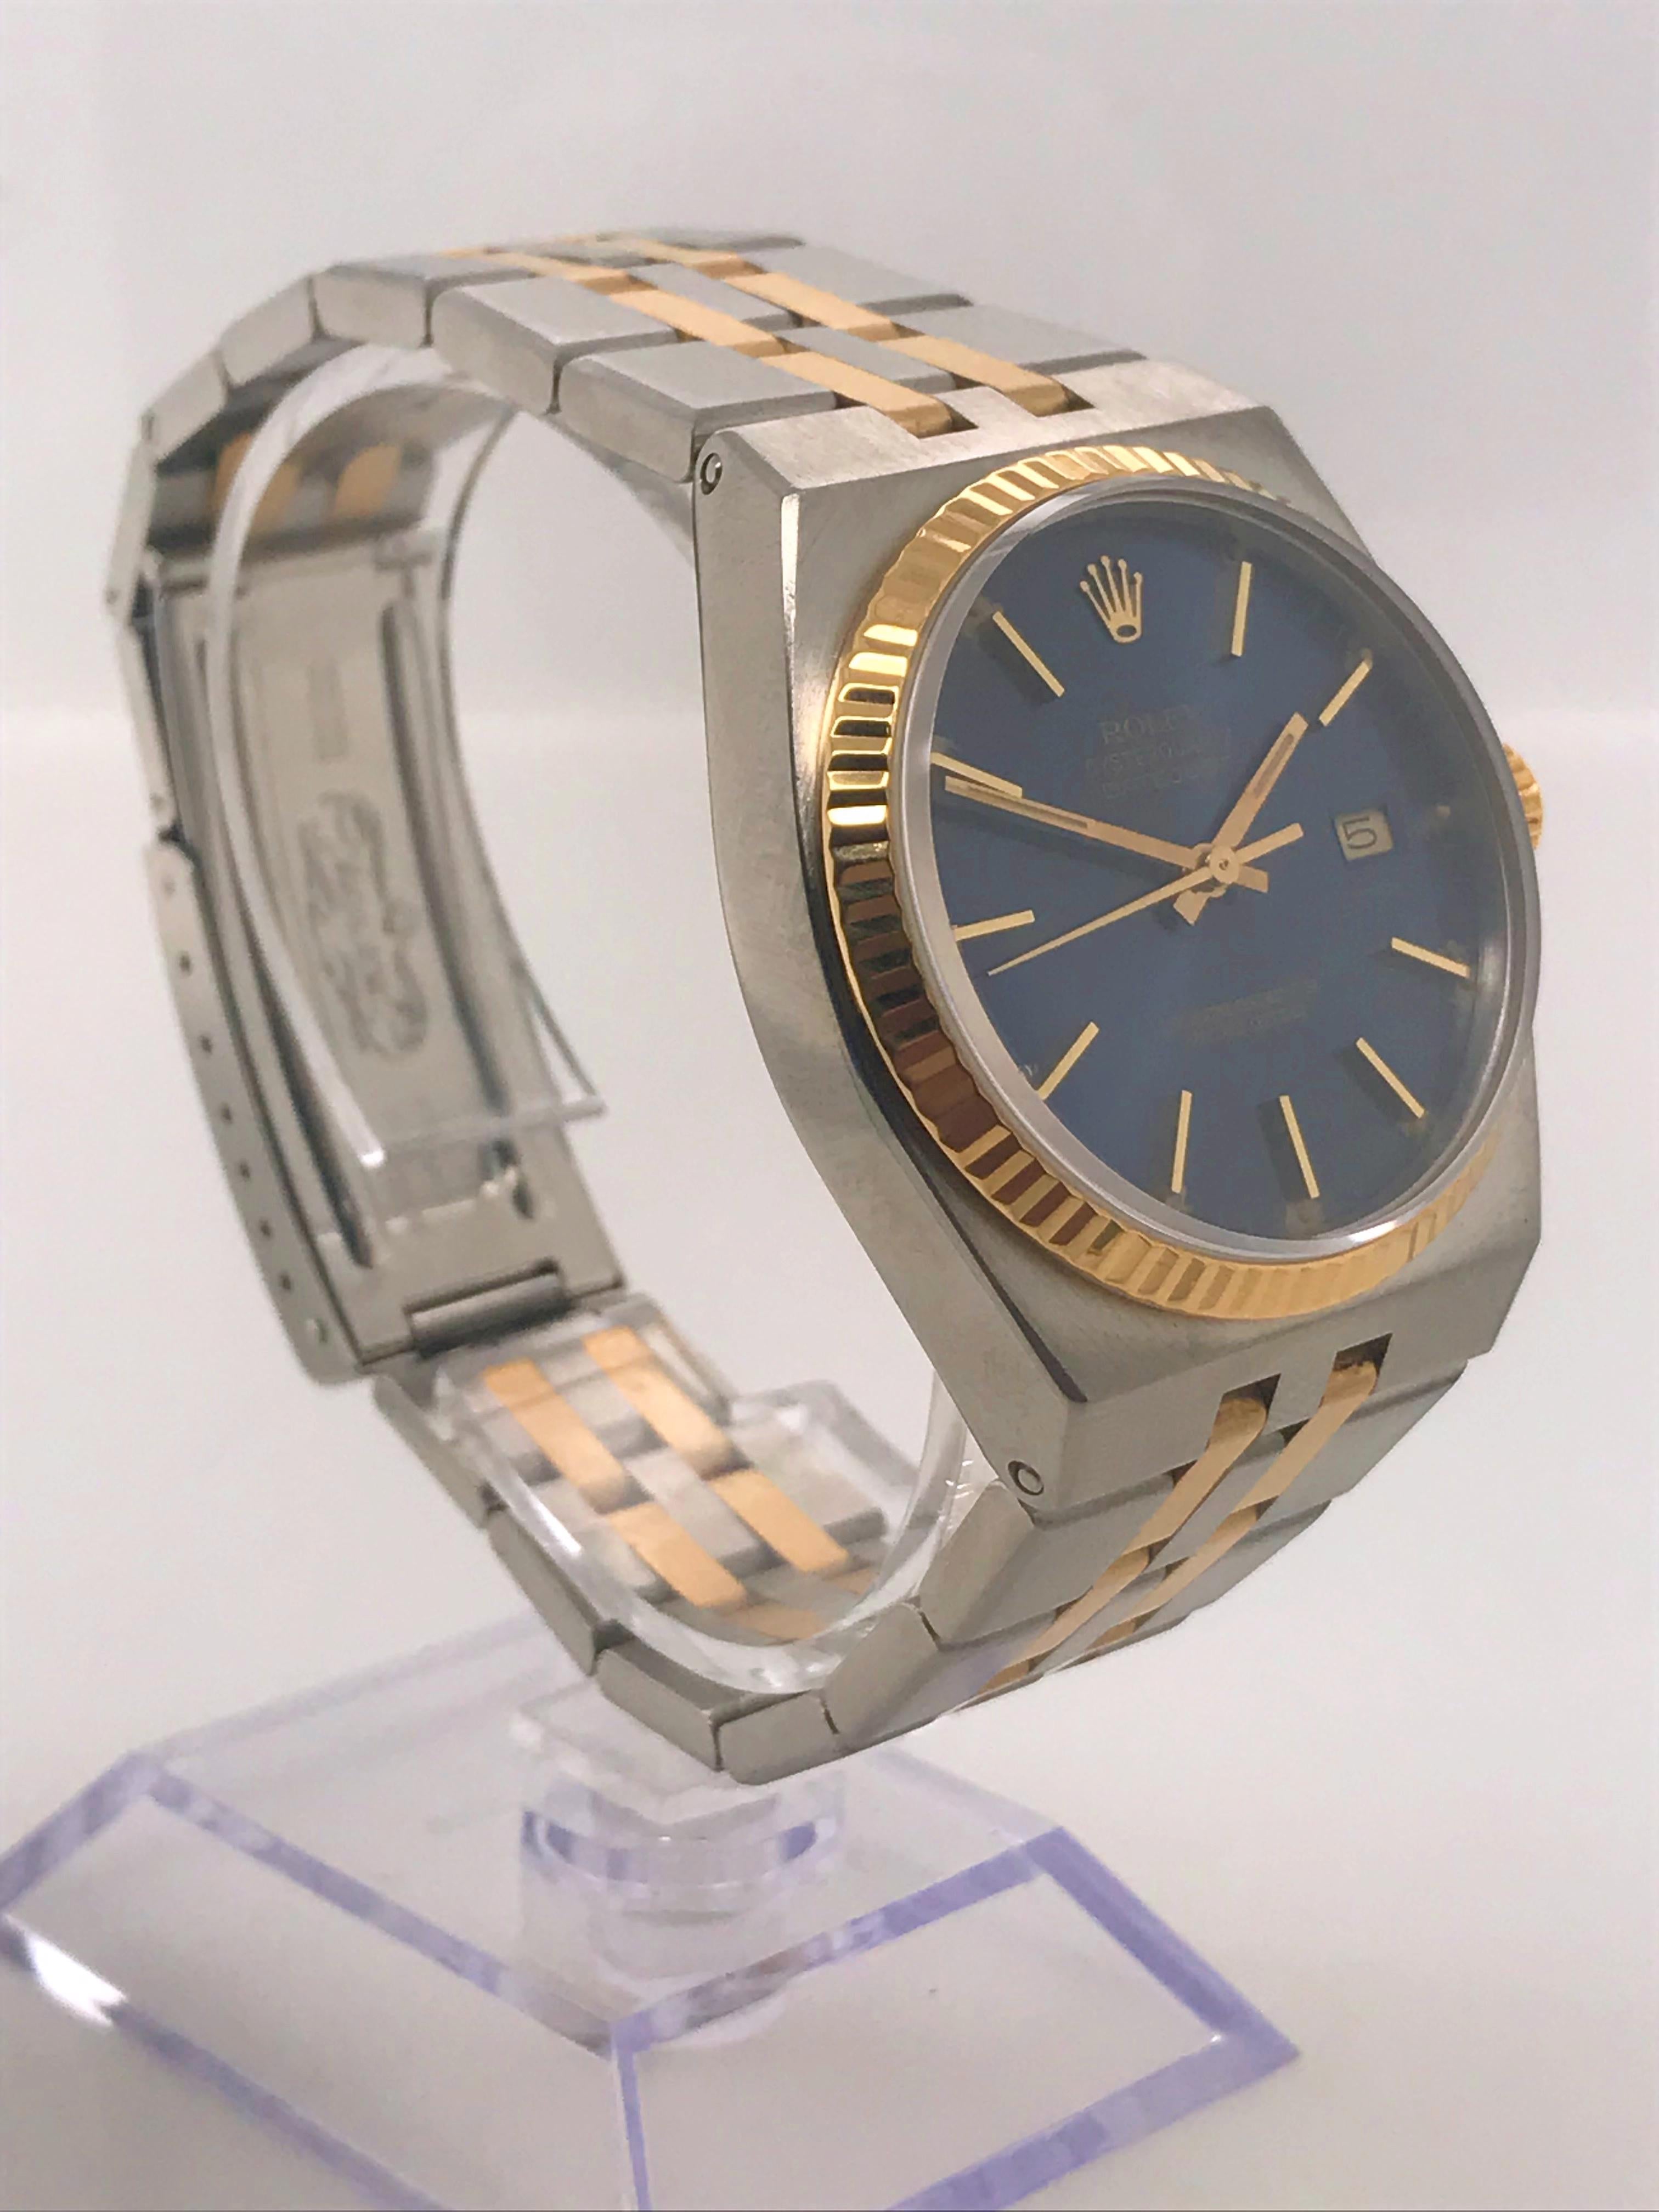 This two-tone Rolex Datejust is rare due to its quartz movement. This watch is crafted from stainless steel and 18 karat yellow gold. It features a blue dial with gold markers and a date function at the 6 o’clock position. 

This timepiece was